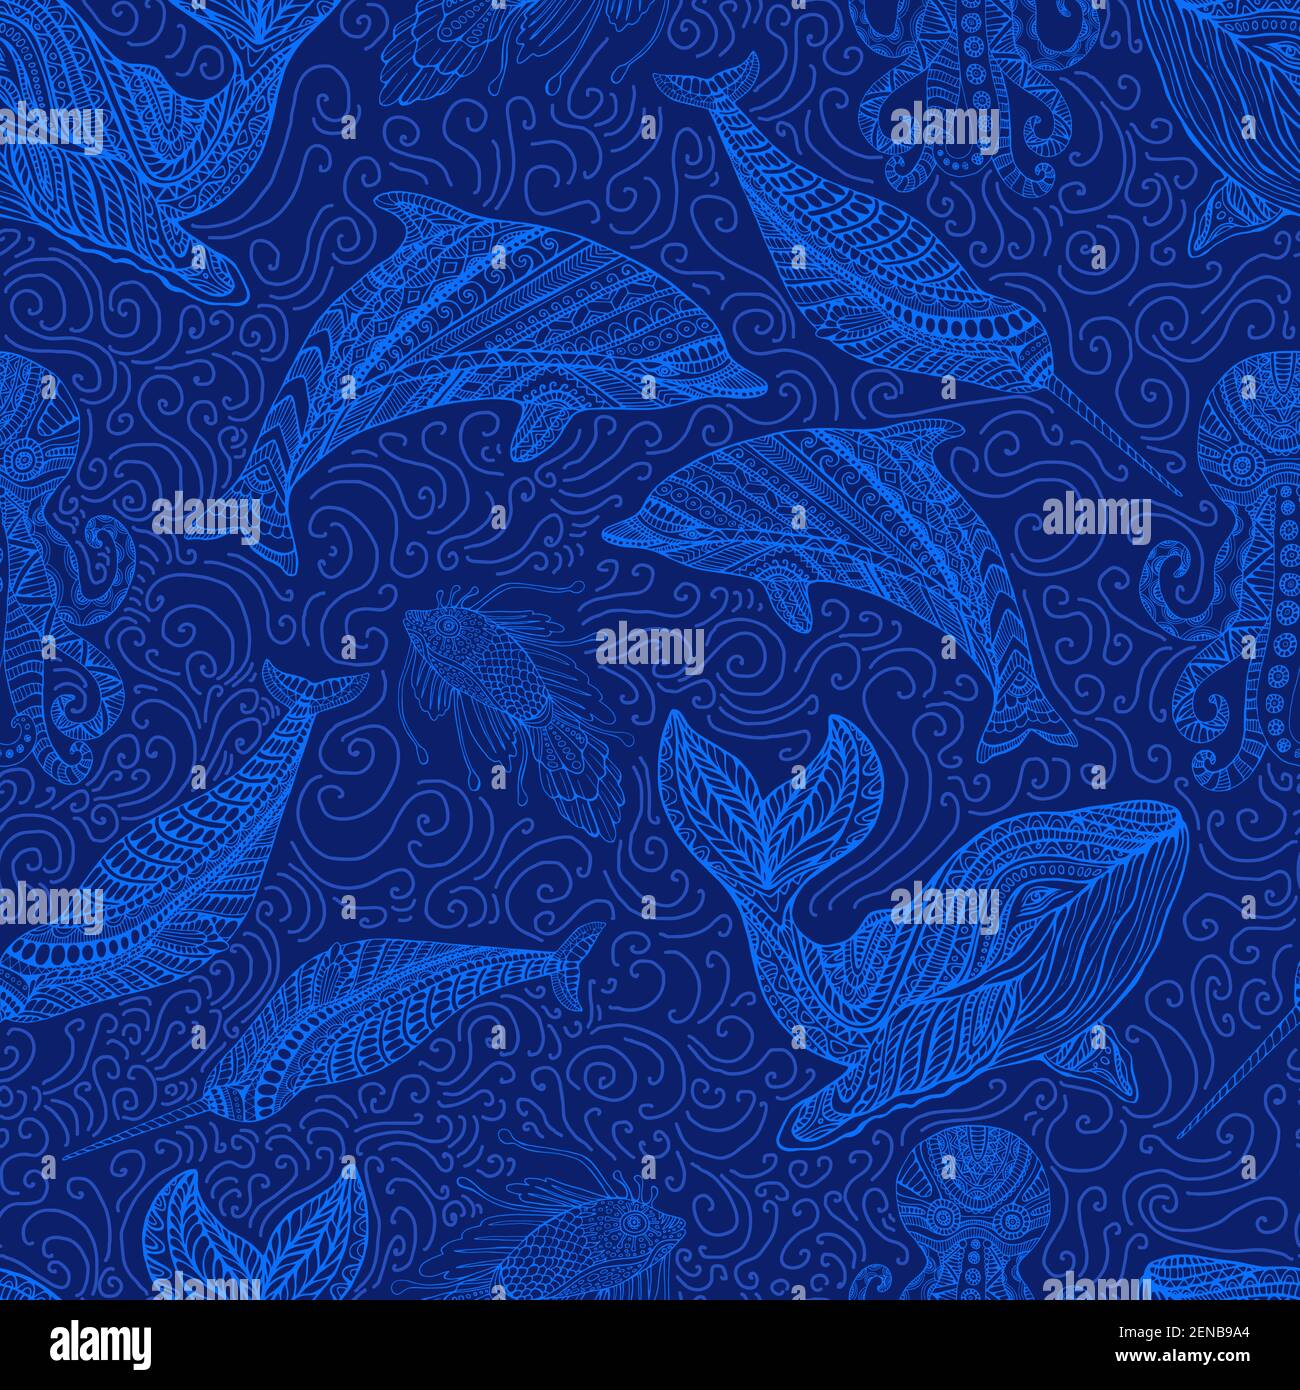 Amazing Whale Dolphin Octopus Narwhal and Fish ornamental sea waves fantasy seamless pattern, blue outline color, isolated on dark blue Stock Vector